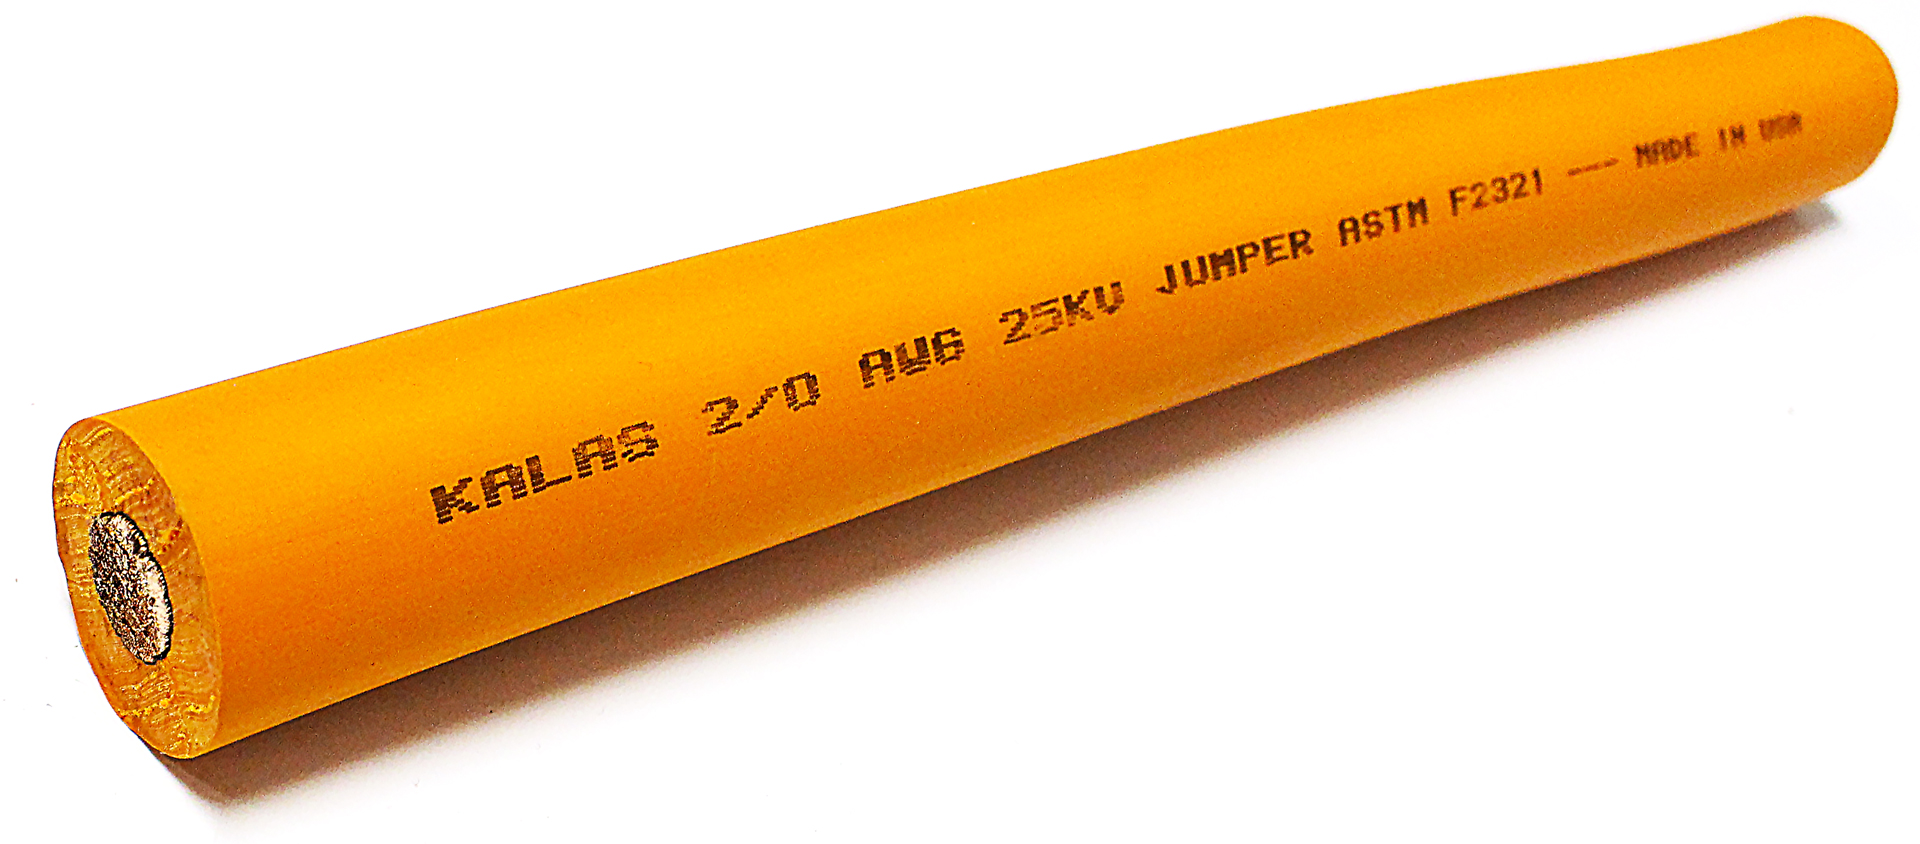 Kalas 90°C NON-SHIELDED JUMPER CABLE Suitable as a temporary flexible power cable for temporary By-Pass connections. CONSTRUCTION Conductor: Annealed Flexible Bare Copper per ASTM B3 & ASTM B172 or Tinned Copper per ASTM B33 & ASTM B172 Separator: Semi-conductive tape separator between the copper and ERP Insulation Insulation: Thermoset Ethylene-Propylene Rubber (EPR) BK/JC/8.20 Specifications contained herein reflect current data and are subject to change. Values are nominal and/or approximate. ISO 9001:2015 CERTIFIED ISO 14001:2015 CERTIFIED MADE IN THE USA LISTED RoHS: Kalas